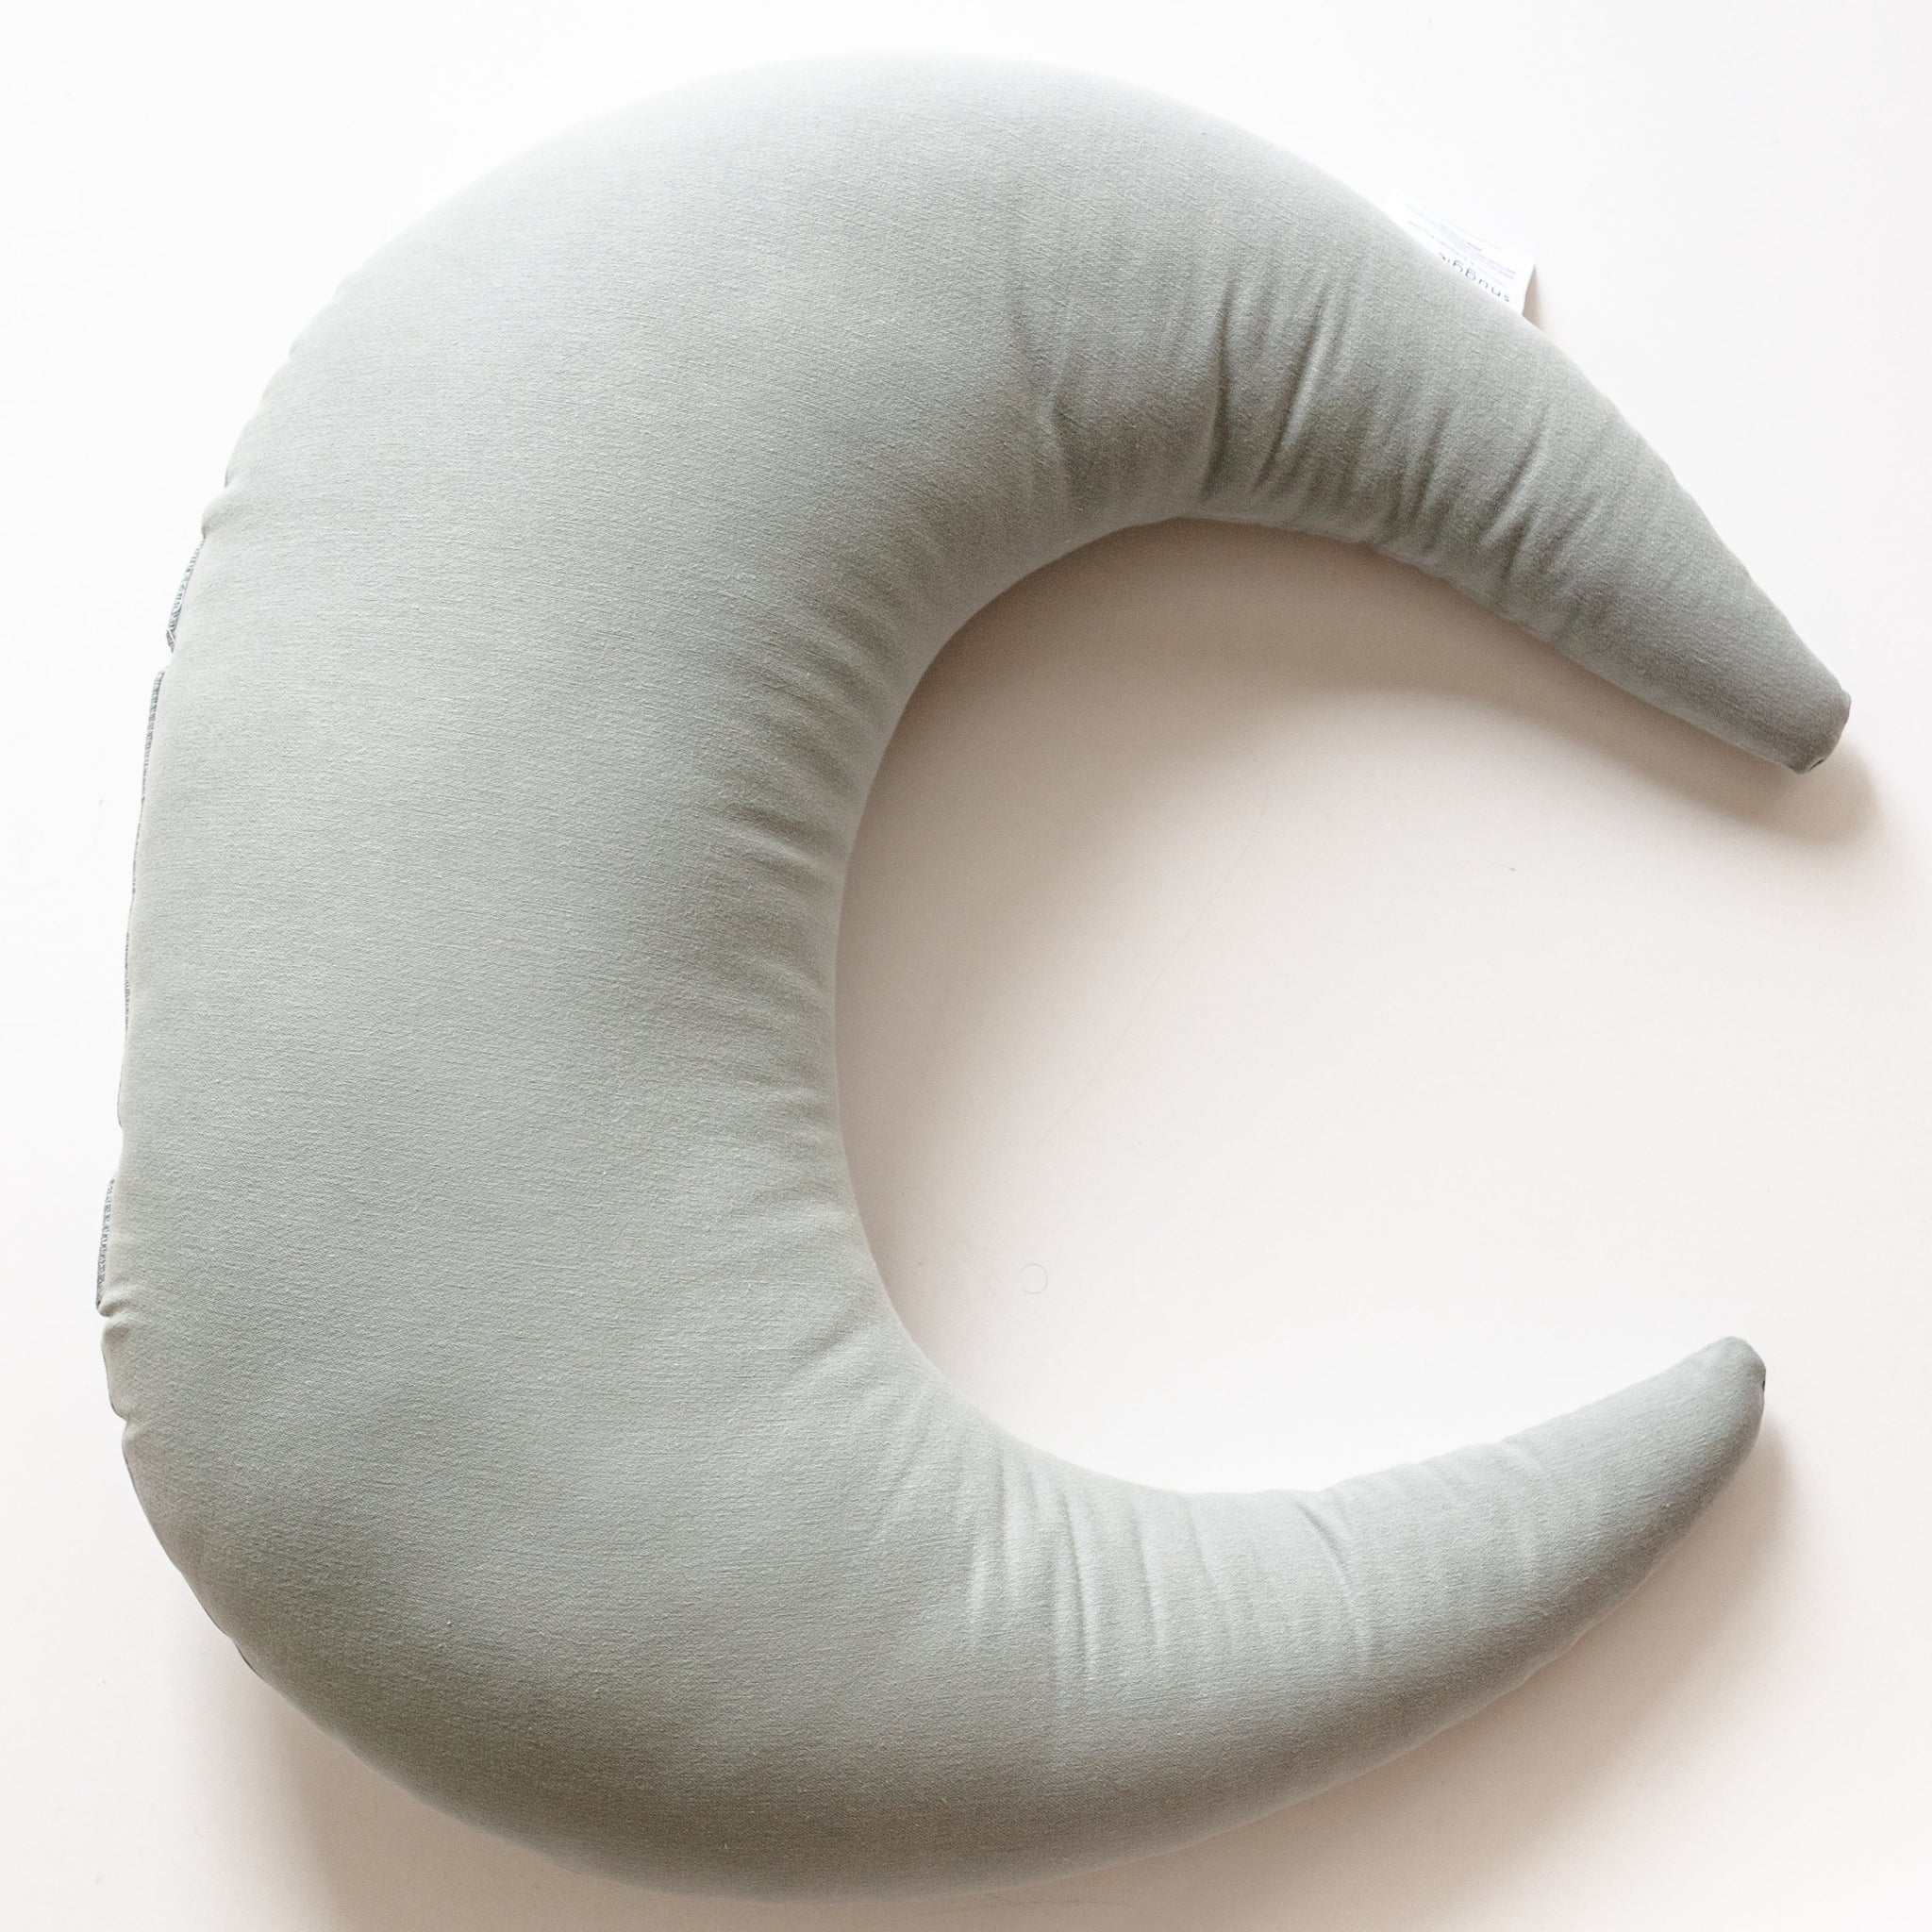 A Snuggle Me Feeding & Support Pillow in a crescent shape on a white surface.